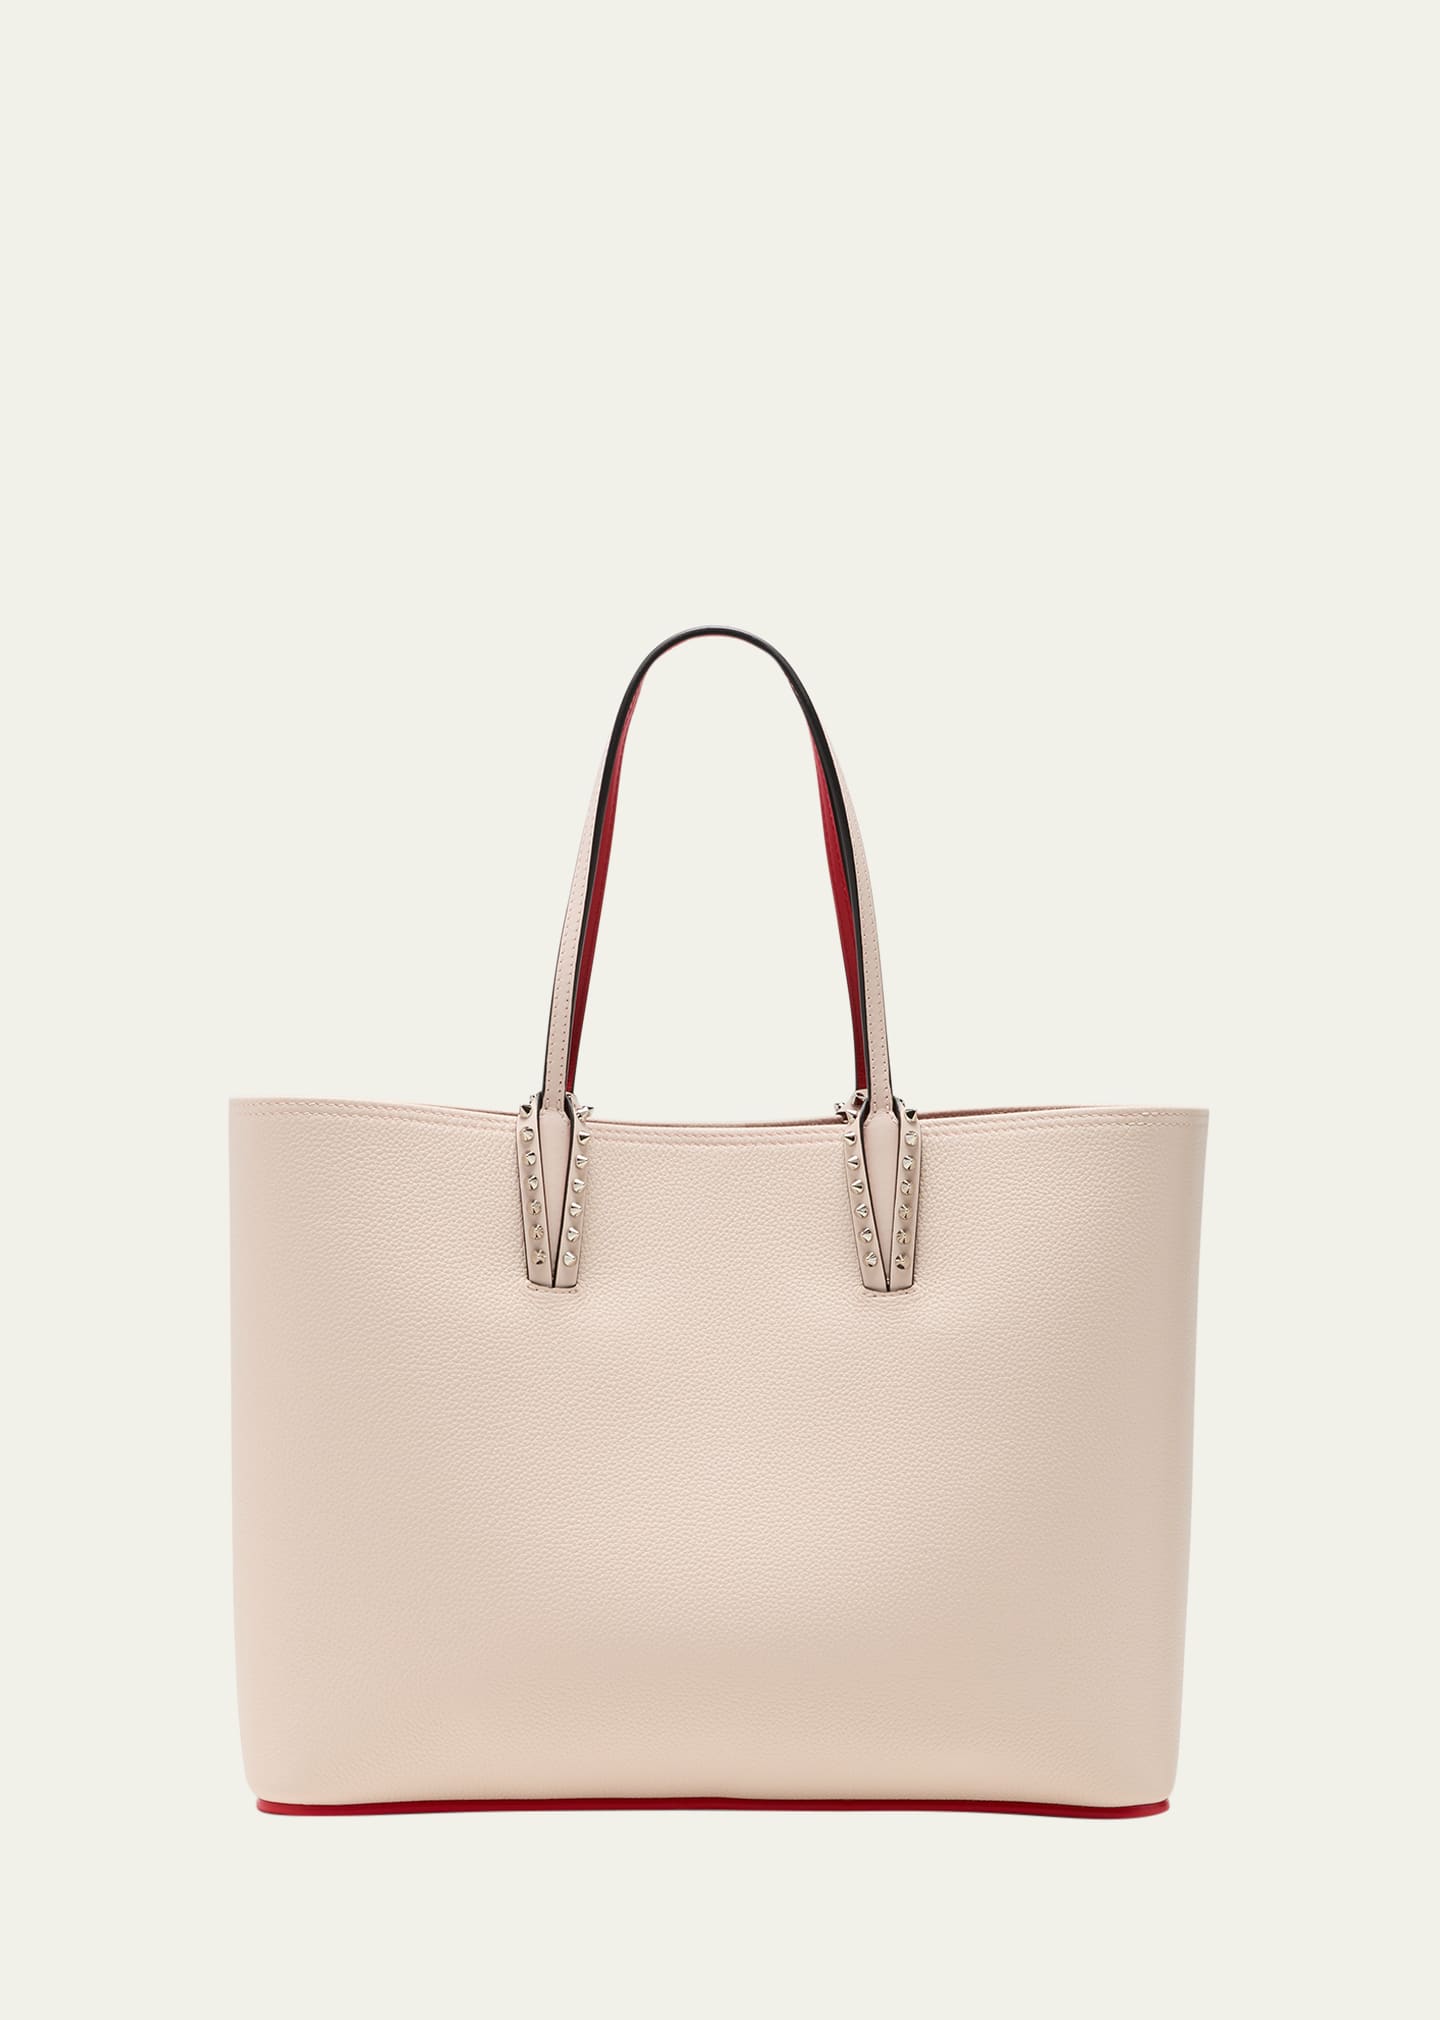 Cabata Tote in Grained Leather